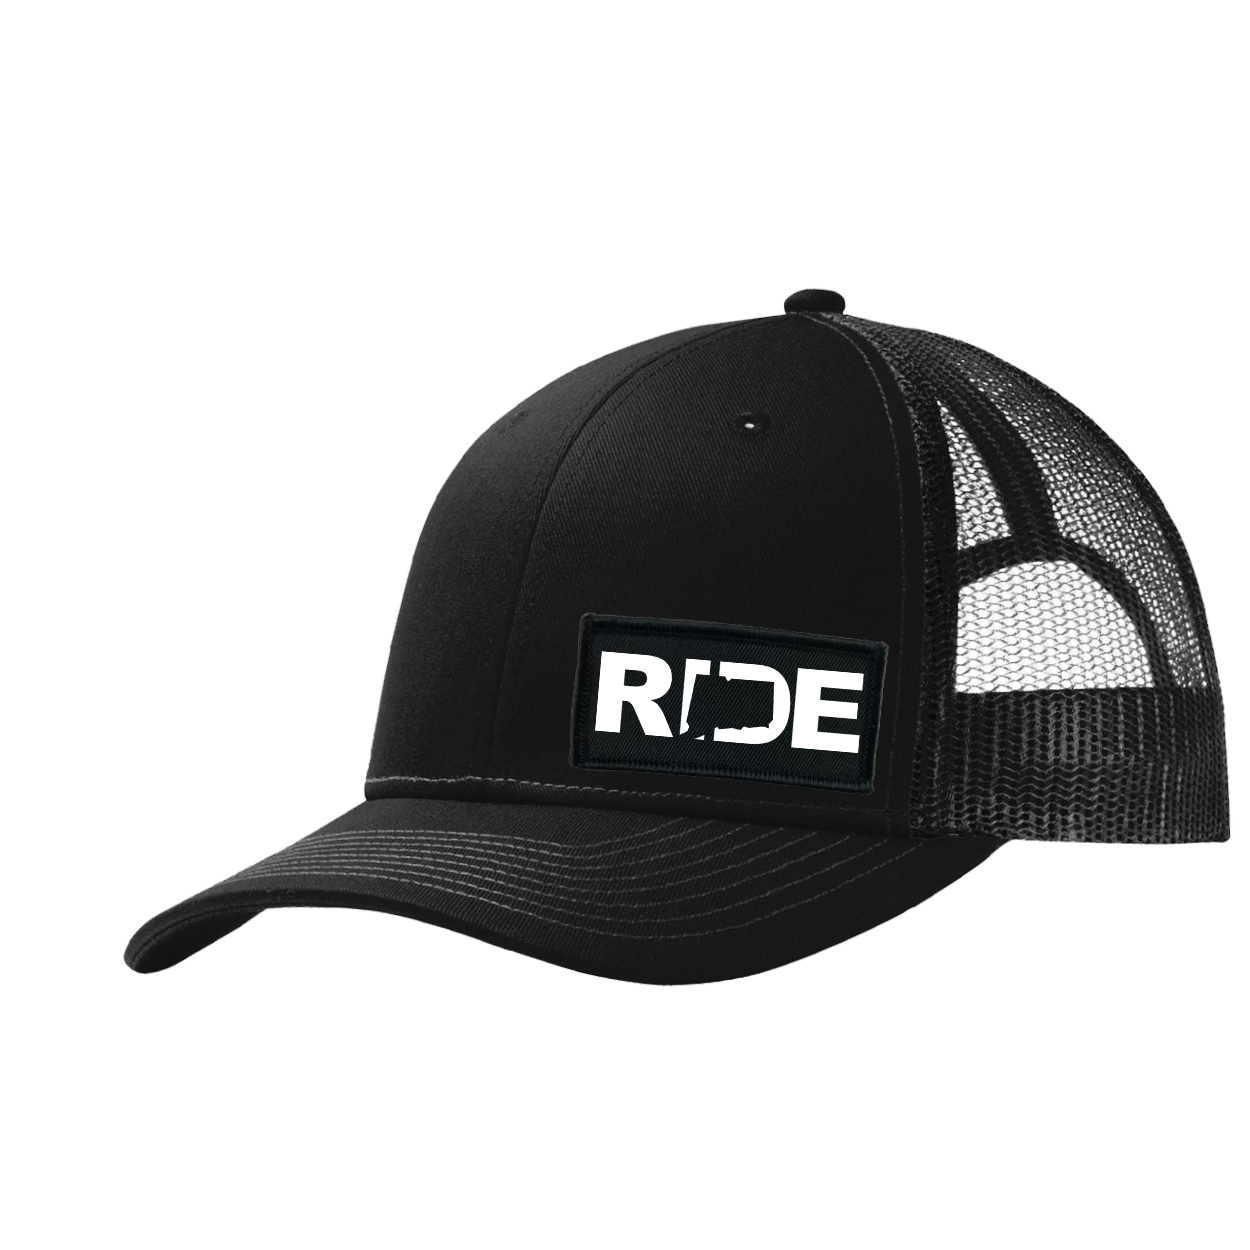 Ride Connecticut Night Out Woven Patch Snapback Trucker Hat Black (White Logo)